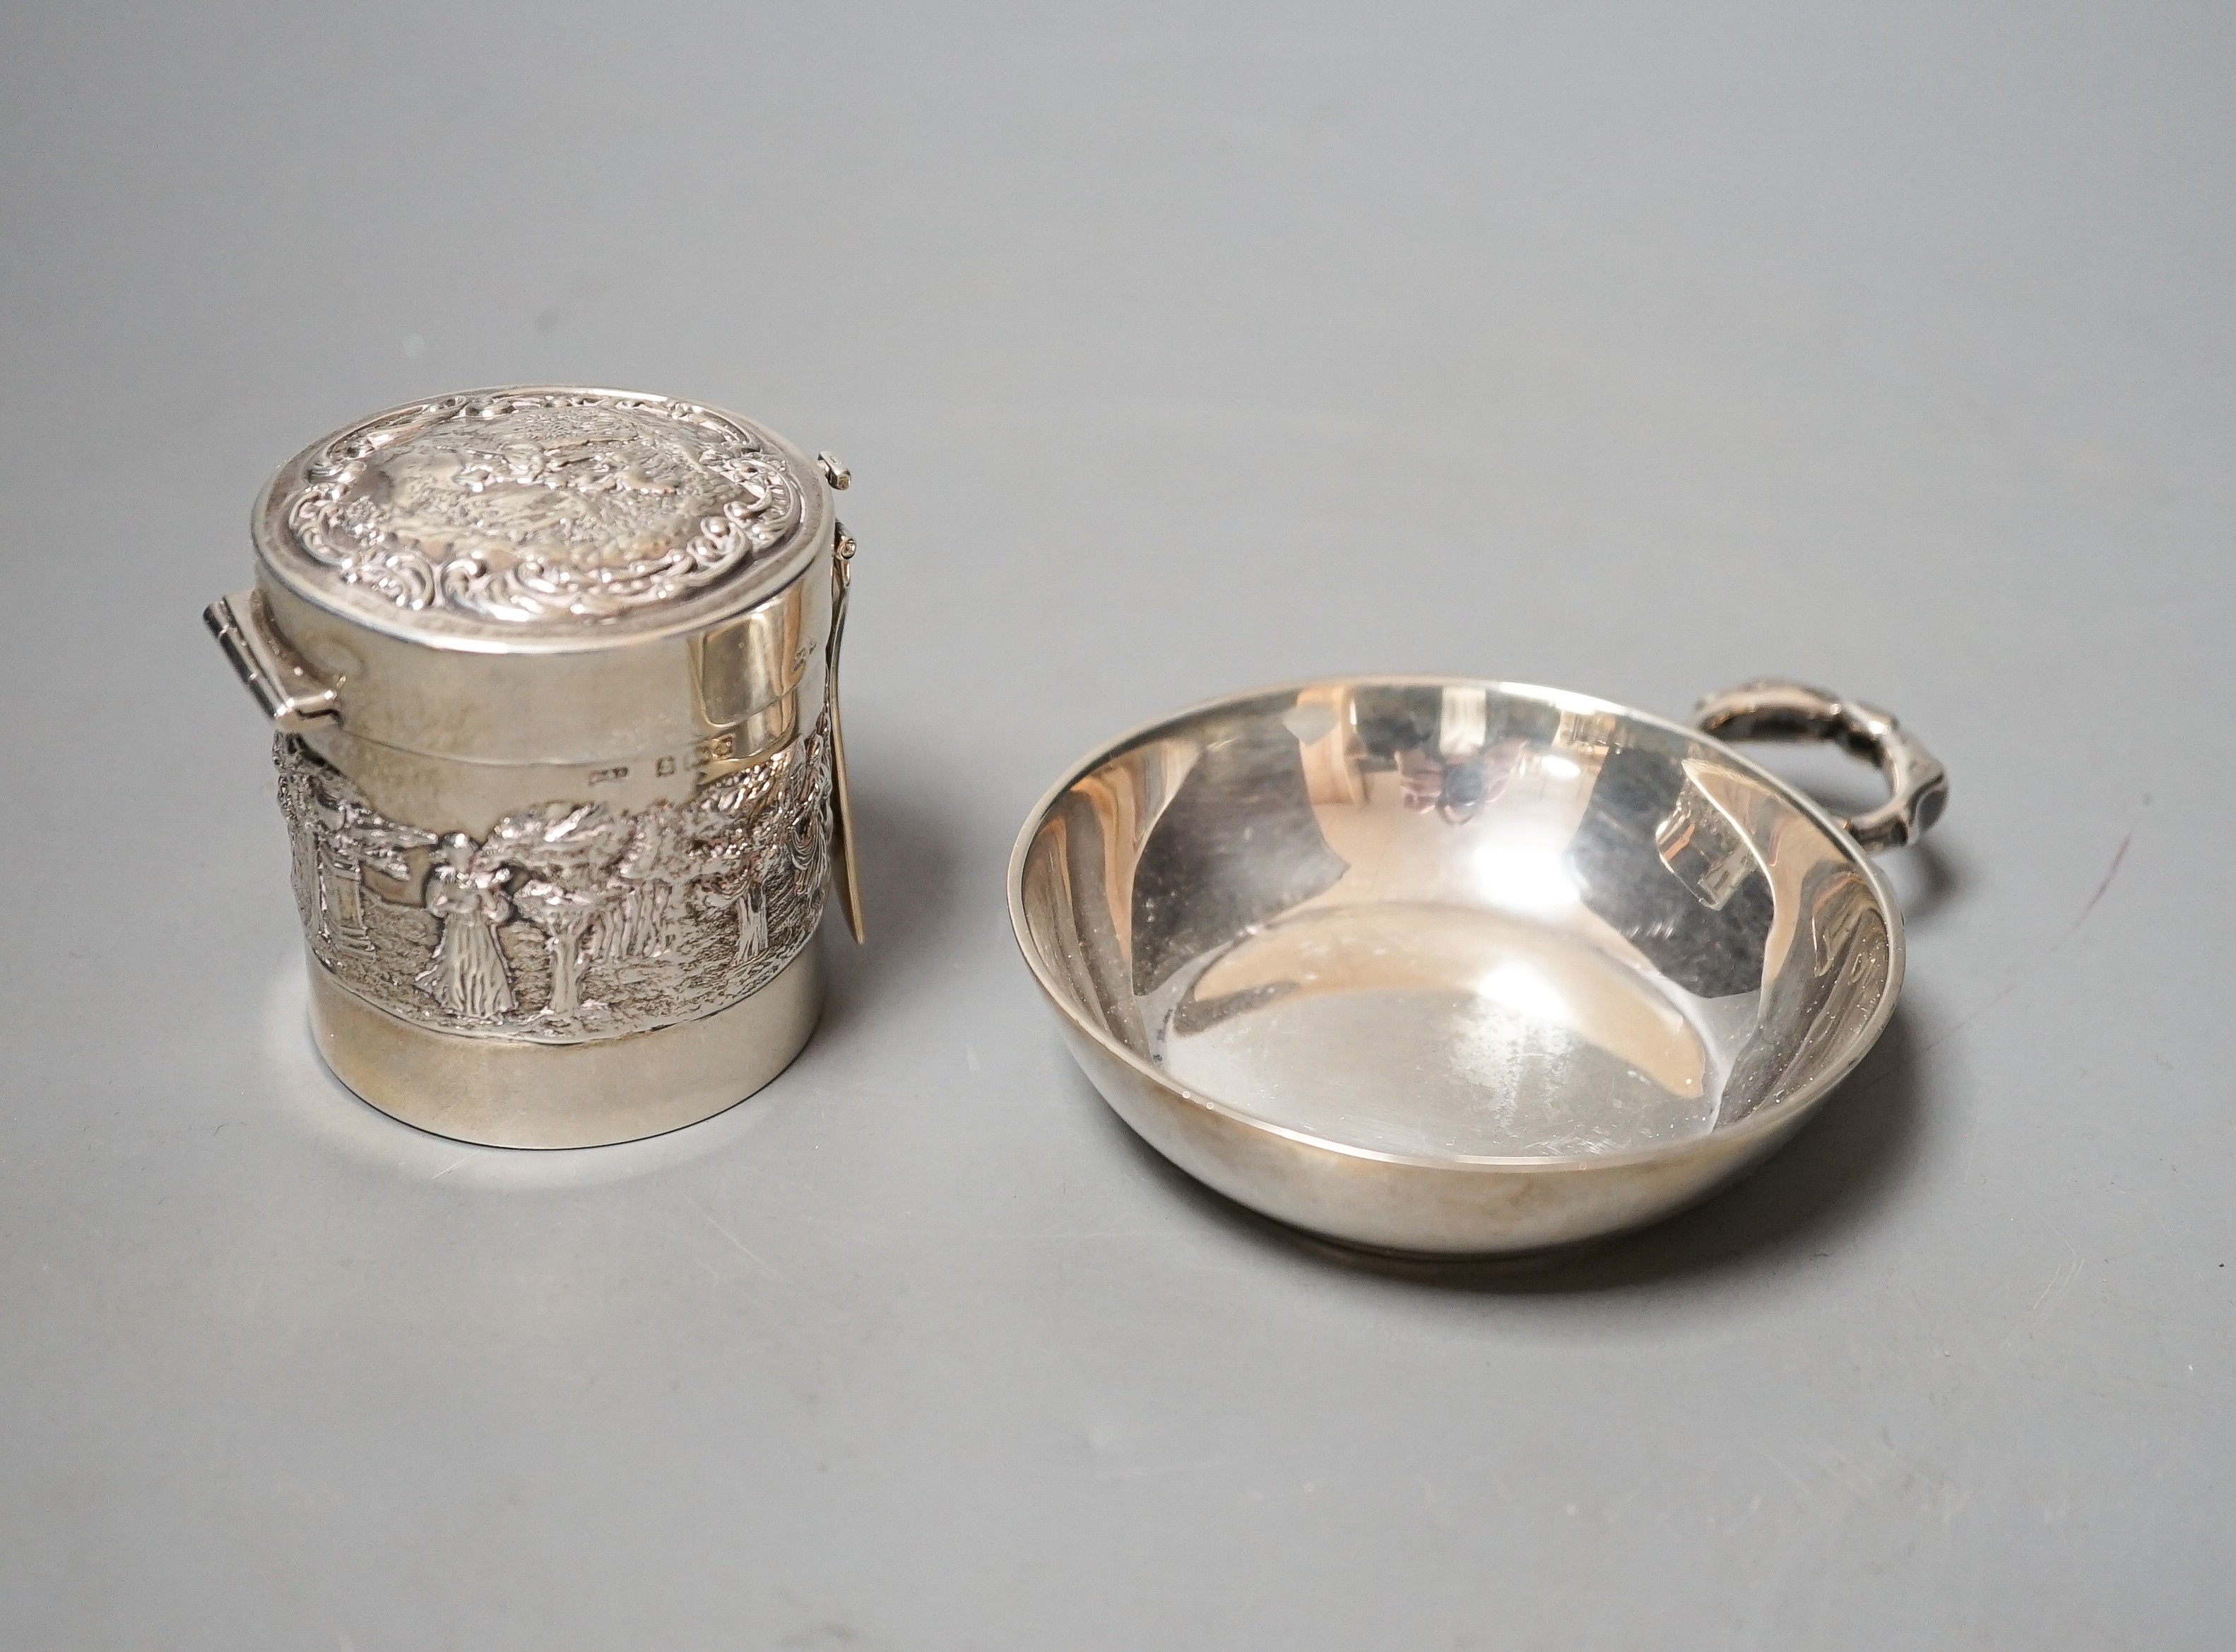 A George V silver taste vin, Tessiers Ltd, London, 1924, 10.2cm, together with an Edwardian embossed silver travelling hair curling tongs warmer, Levy & Salaman, Birmingham, 1901, 52mm (lacking warmer?).